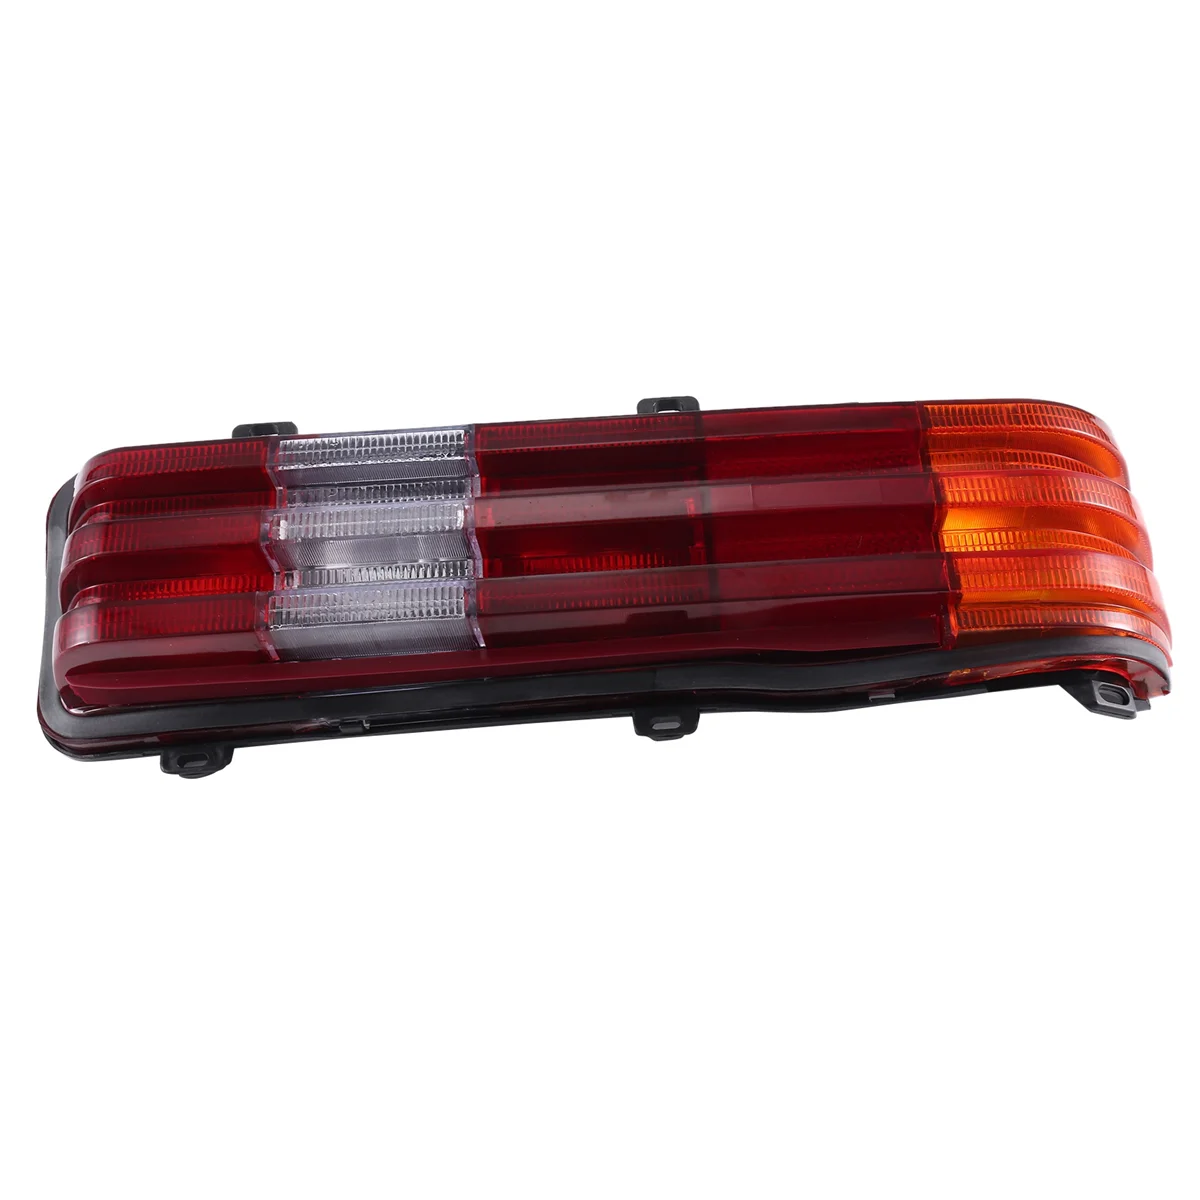 

Car Rear Tail Light for Mercedes Benz W123 1976-1984